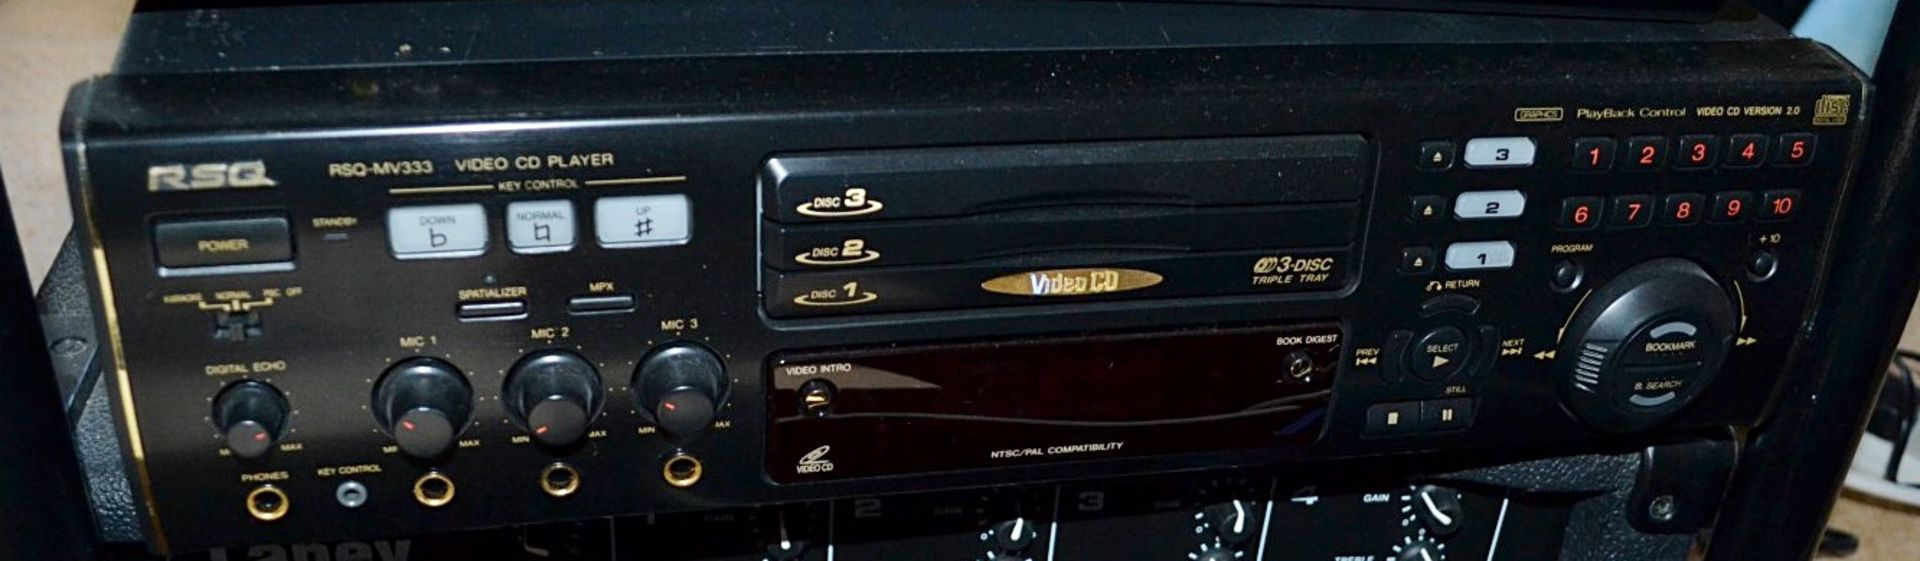 1 x RSQ MV-333 TRIPLE TRAY CD/CDG/VCD Karaoke Player - Preowned In Good Condition - Ref: KHF232 /